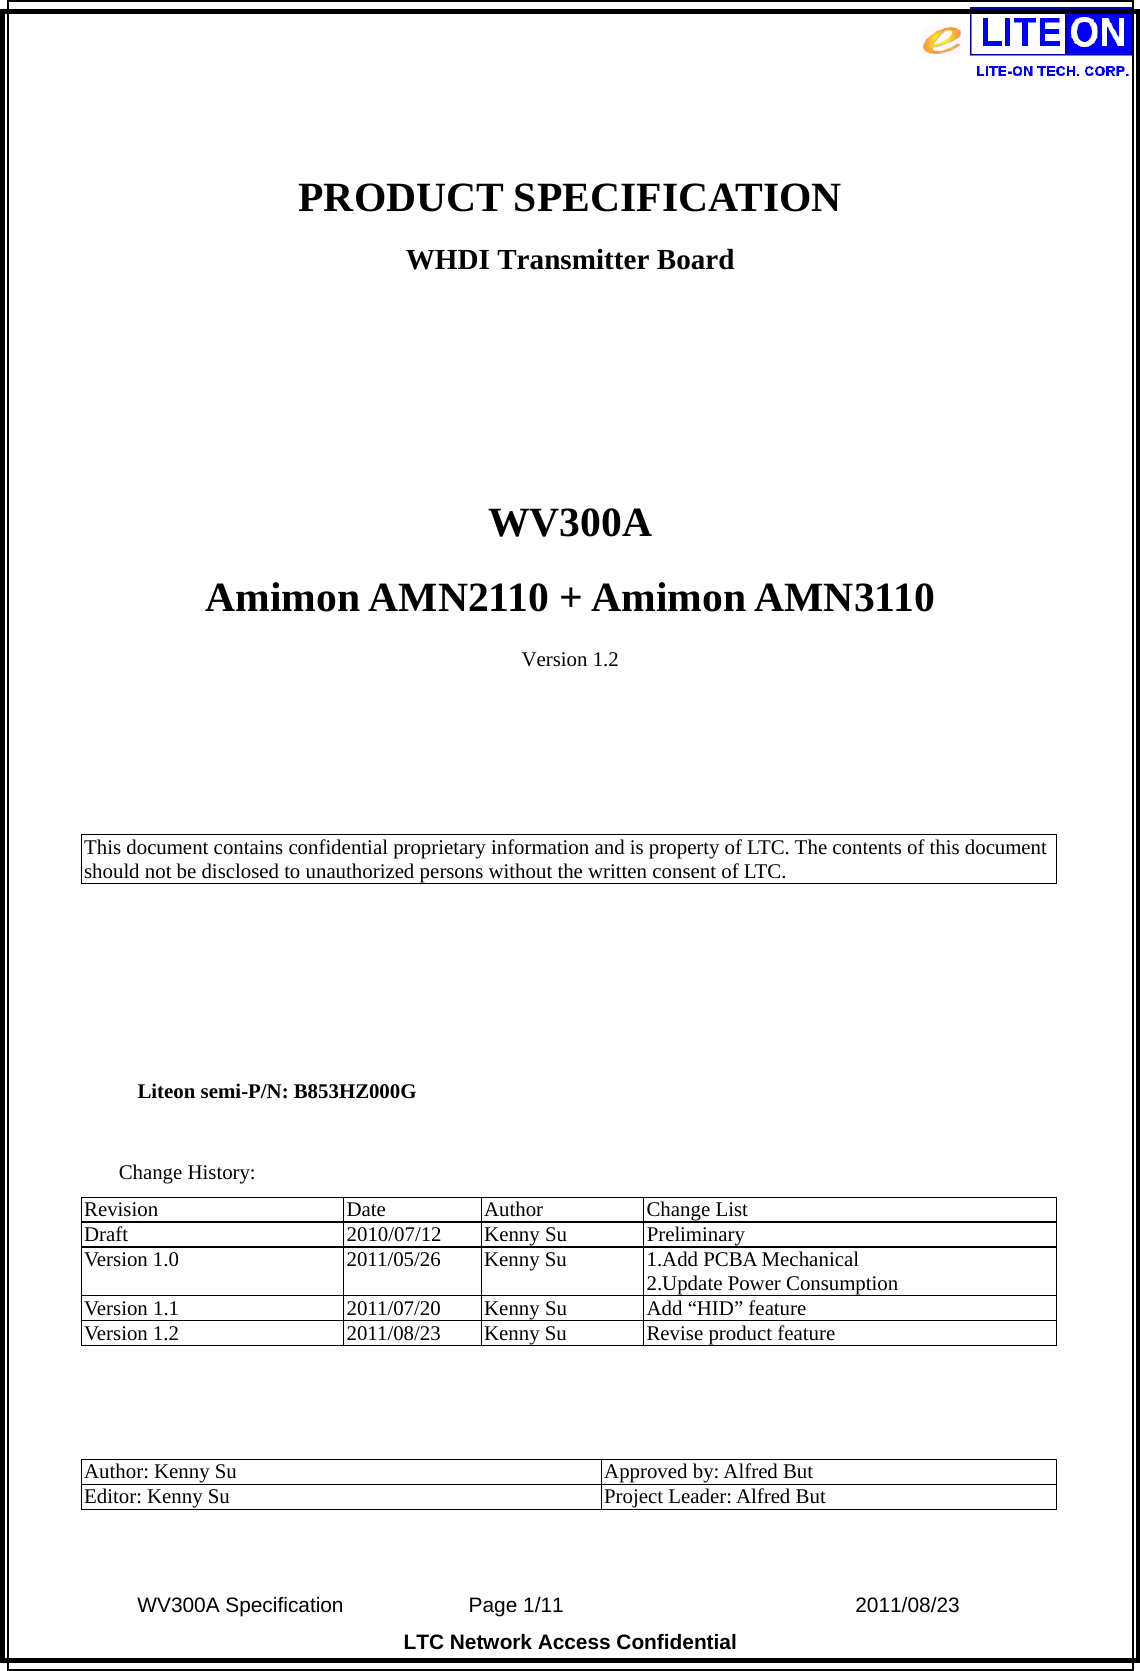  WV300A Specification             Page 1/11                            2011/08/23 LTC Network Access Confidential  PRODUCT SPECIFICATION WHDI Transmitter Board    WV300A Amimon AMN2110 + Amimon AMN3110 Version 1.2     This document contains confidential proprietary information and is property of LTC. The contents of this document should not be disclosed to unauthorized persons without the written consent of LTC.      Liteon semi-P/N: B853HZ000G  Change History: Revision Date Author Change List Draft 2010/07/12 Kenny Su Preliminary Version 1.0  2011/05/26  Kenny Su  1.Add PCBA Mechanical 2.Update Power Consumption Version 1.1  2011/07/20  Kenny Su  Add “HID” feature Version 1.2  2011/08/23  Kenny Su  Revise product feature    Author: Kenny Su  Approved by: Alfred But Editor: Kenny Su  Project Leader: Alfred But  